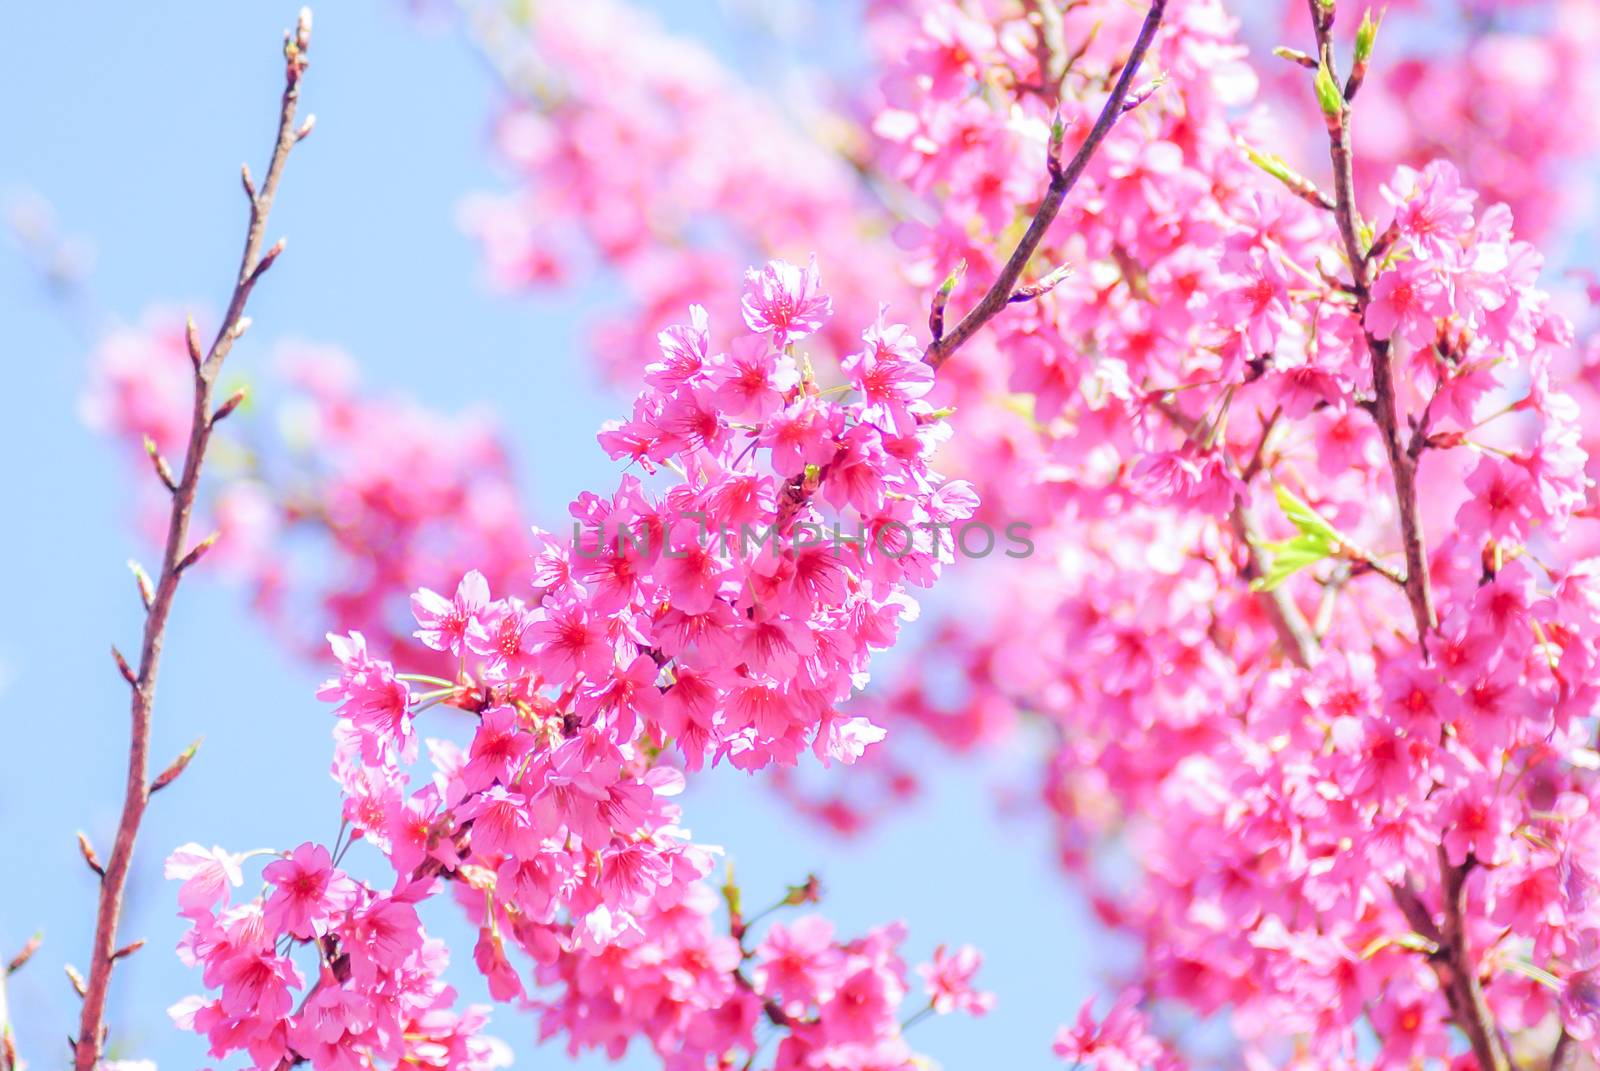 Spring time with beautiful cherry blossoms, pink sakura flowers.
